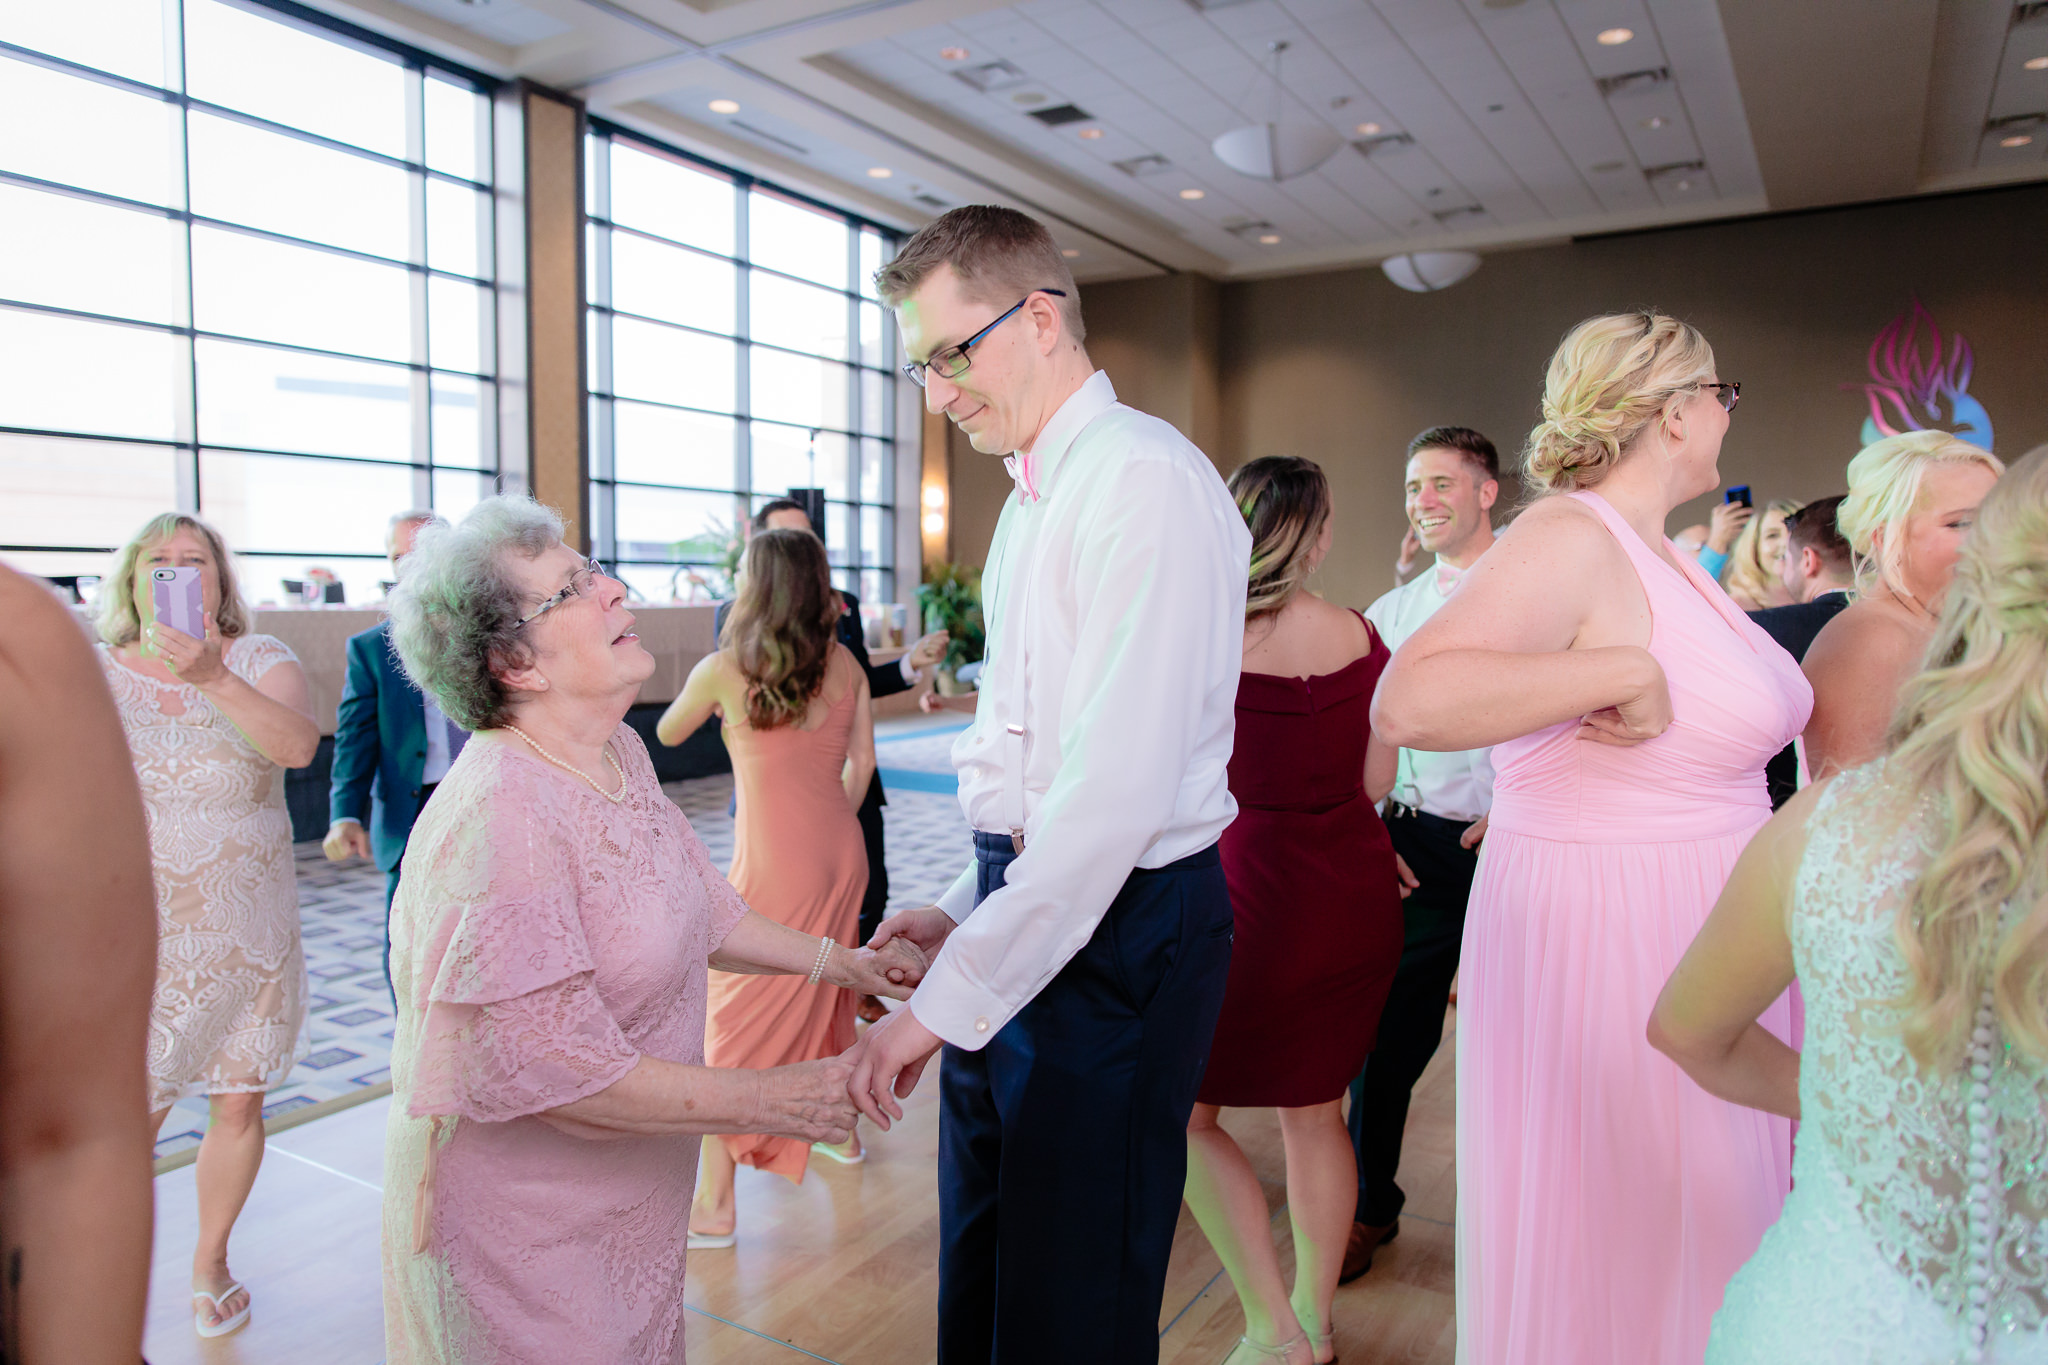 Groomsman dances with his grandmother at Duquesne University